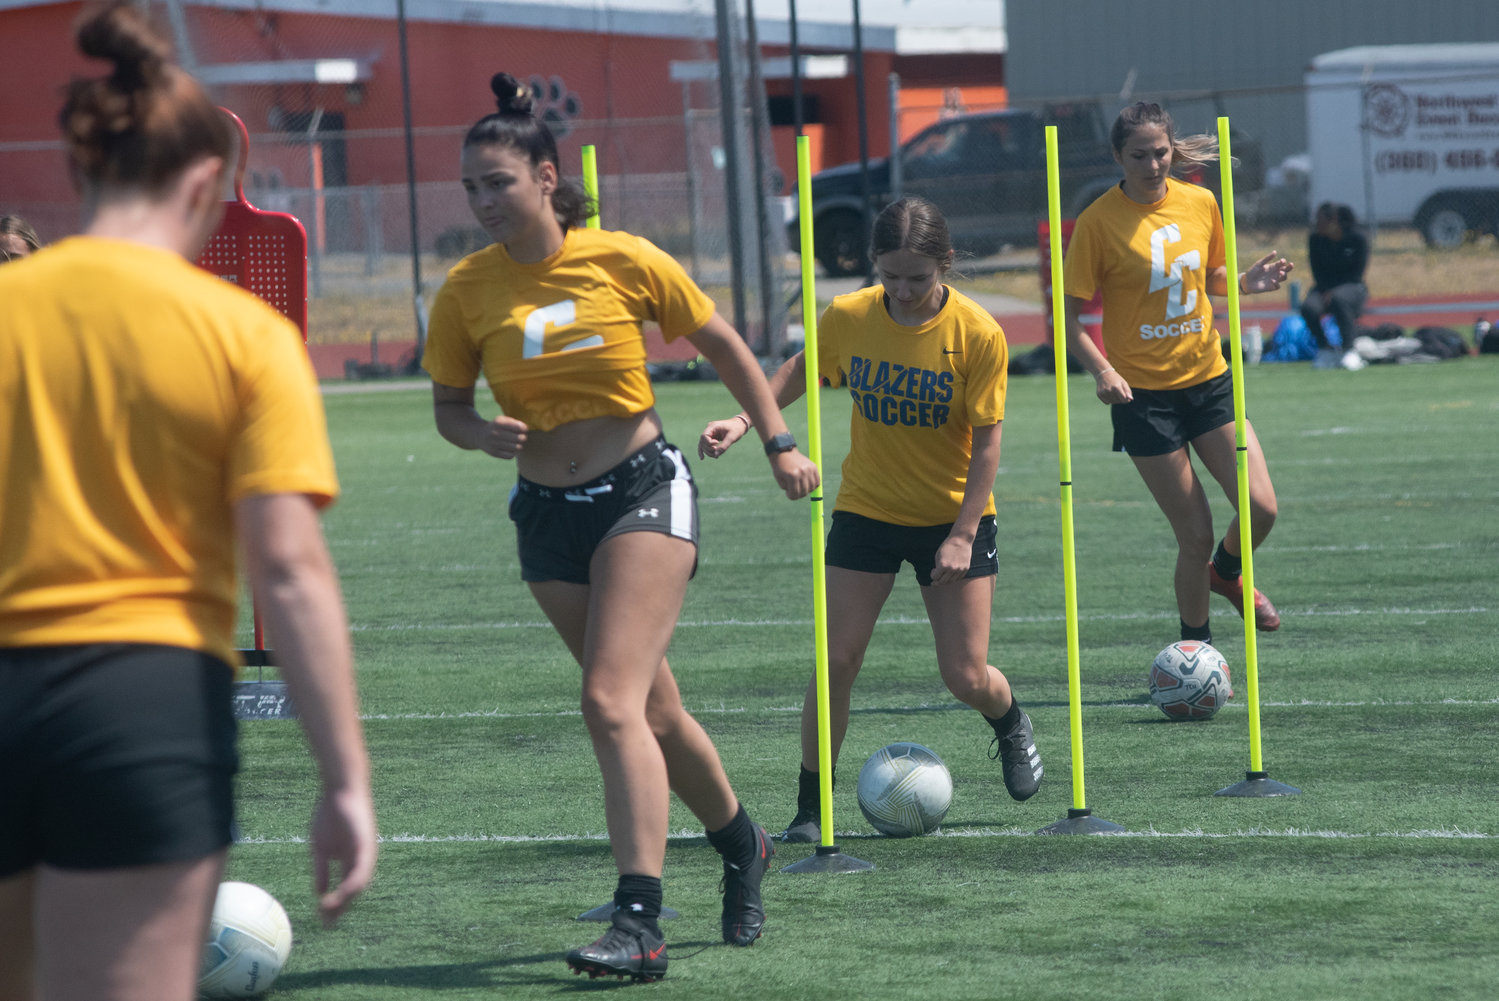 A trio of Trailblazers swerve through a drill during Centralia's practice on Aug. 3, 2022 at Centralia Tiger Stadium.